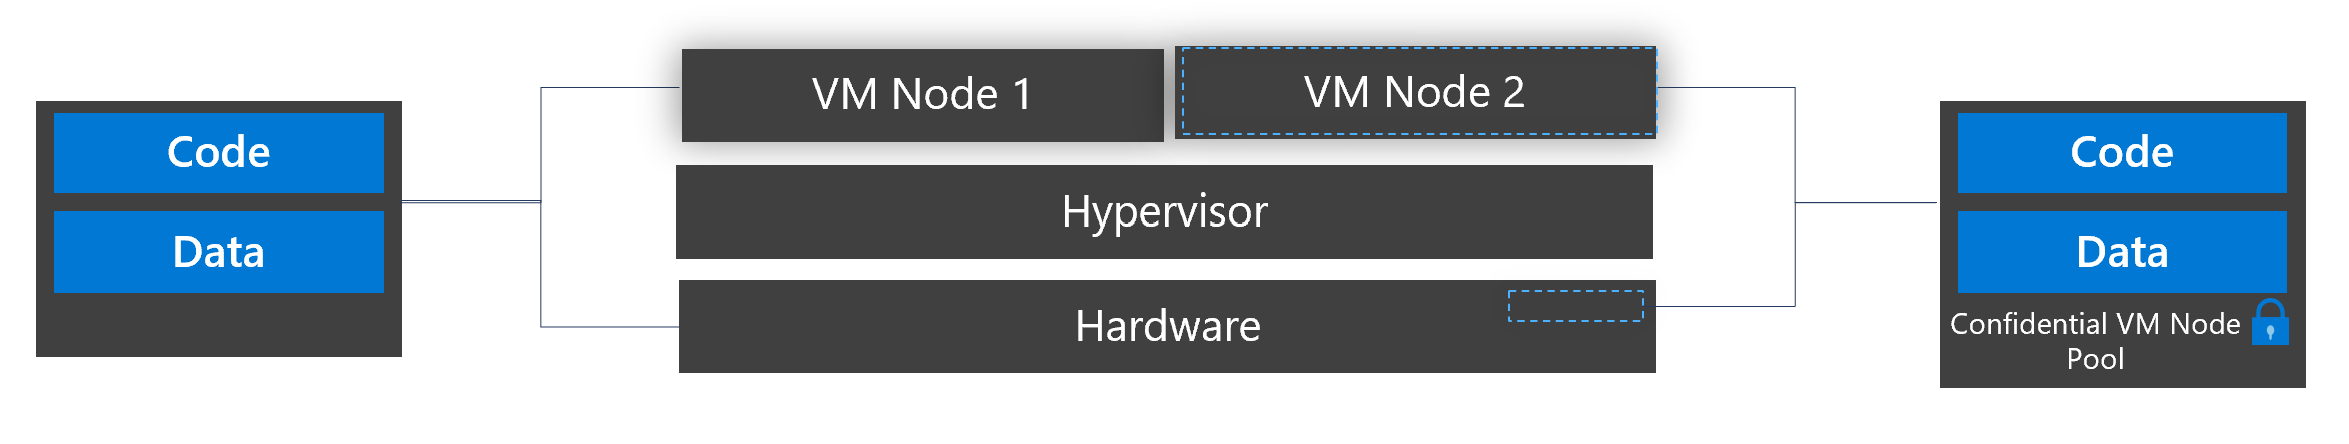 Graphic of VM nodes in AKS with encrypted code and data in confidential VM node pools 1 and 2, on top of the hypervisor